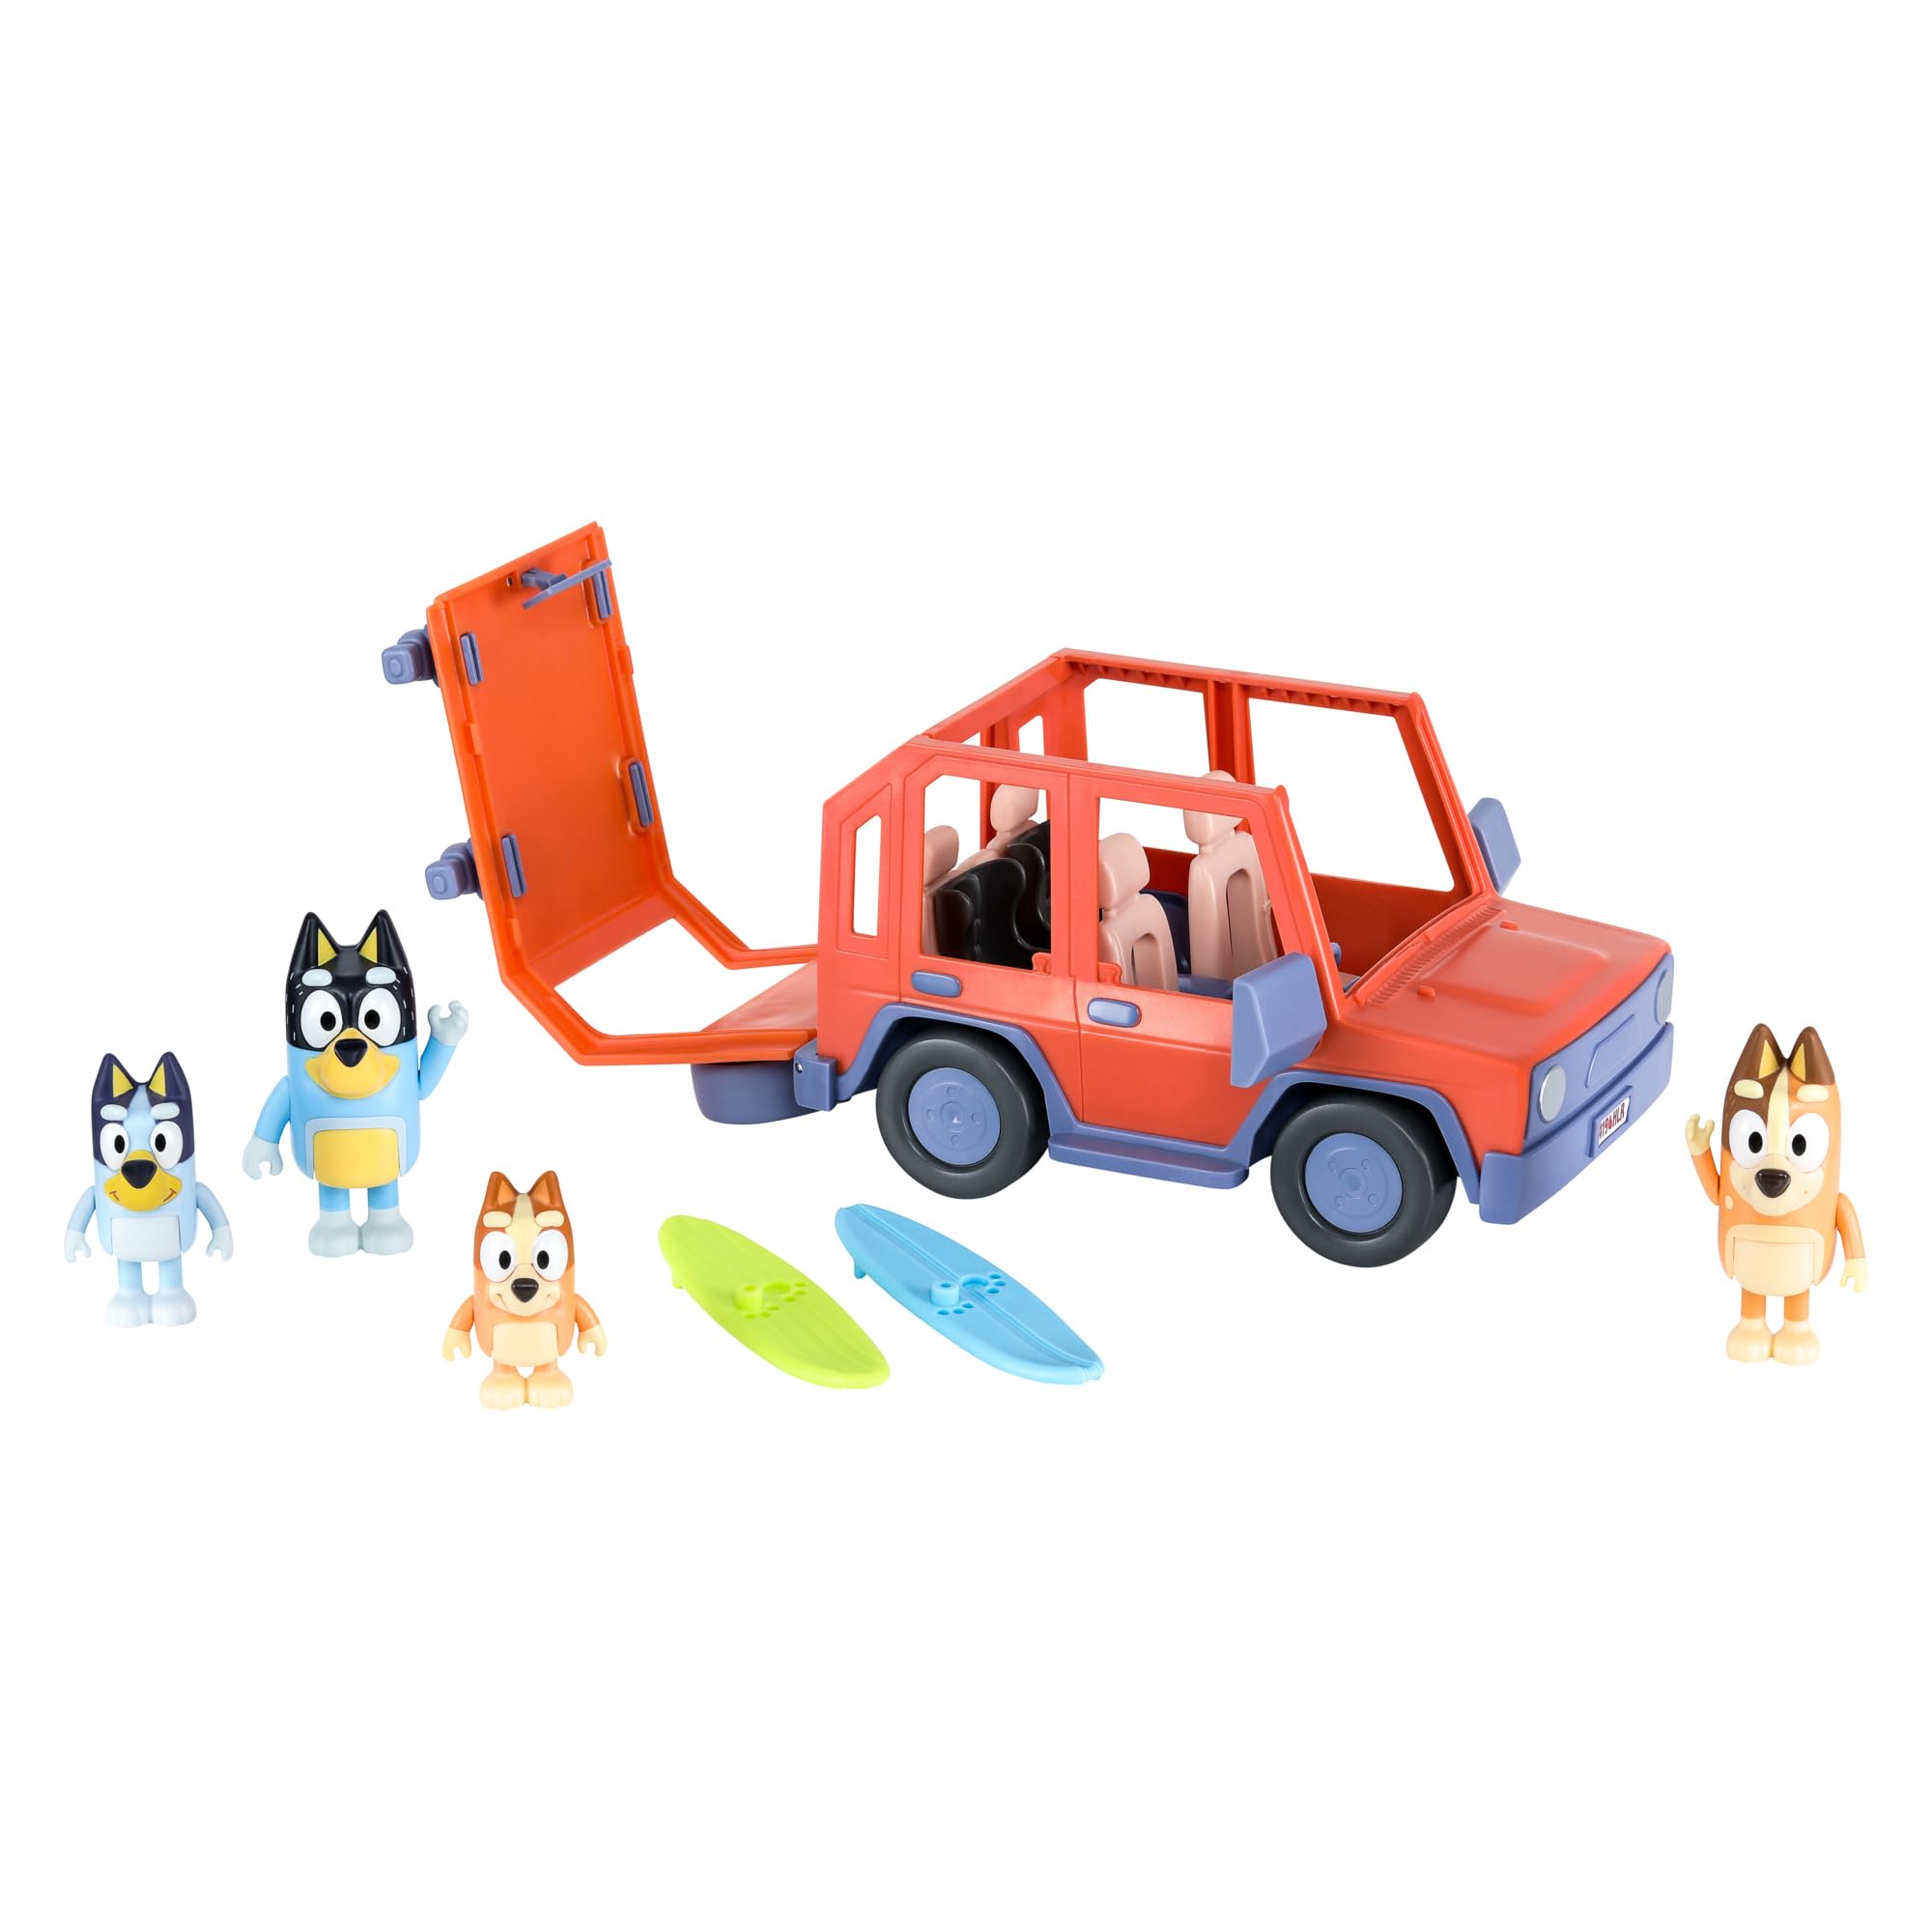 Bluey Heeler Family 4WD Vehicle and 4 Figure Pack, 2.5-3 Inch Figures, 2 Surfboards Accessories and Stickers | Amazon Exclusive